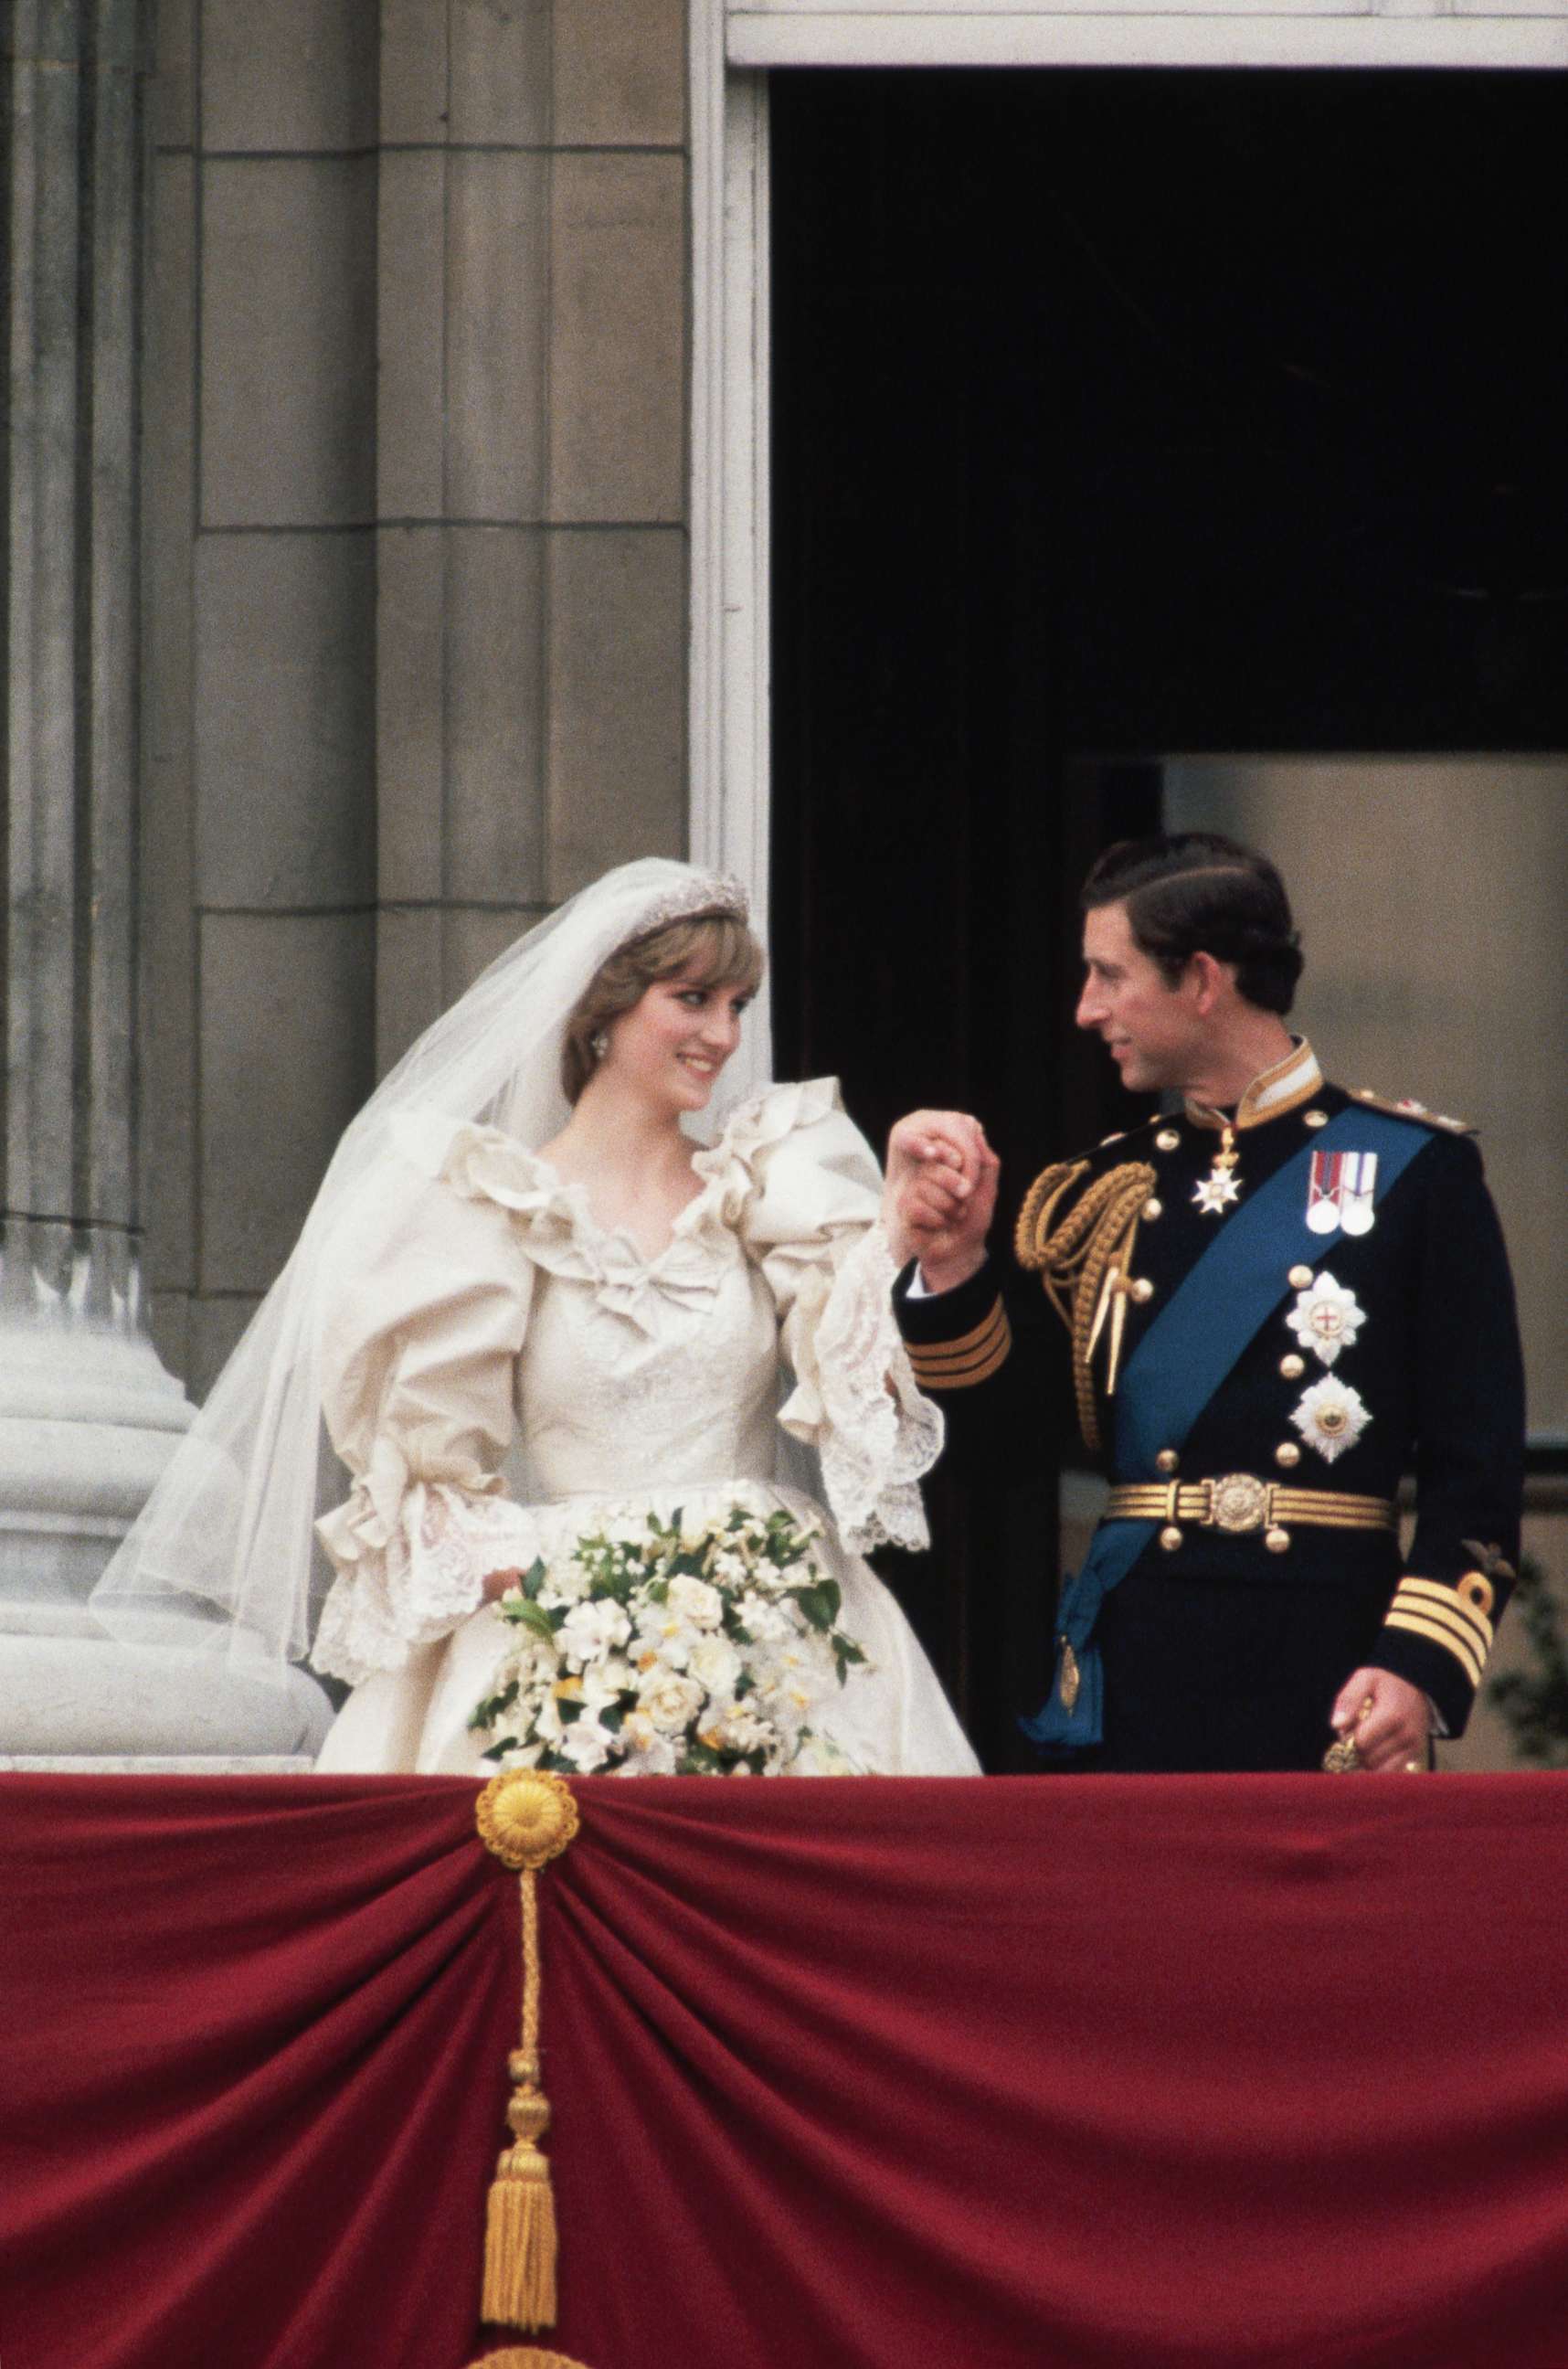 PHOTO: Prince Charles escorts Princess Diana to the balcony at Buckingham Palace just after their wedding.